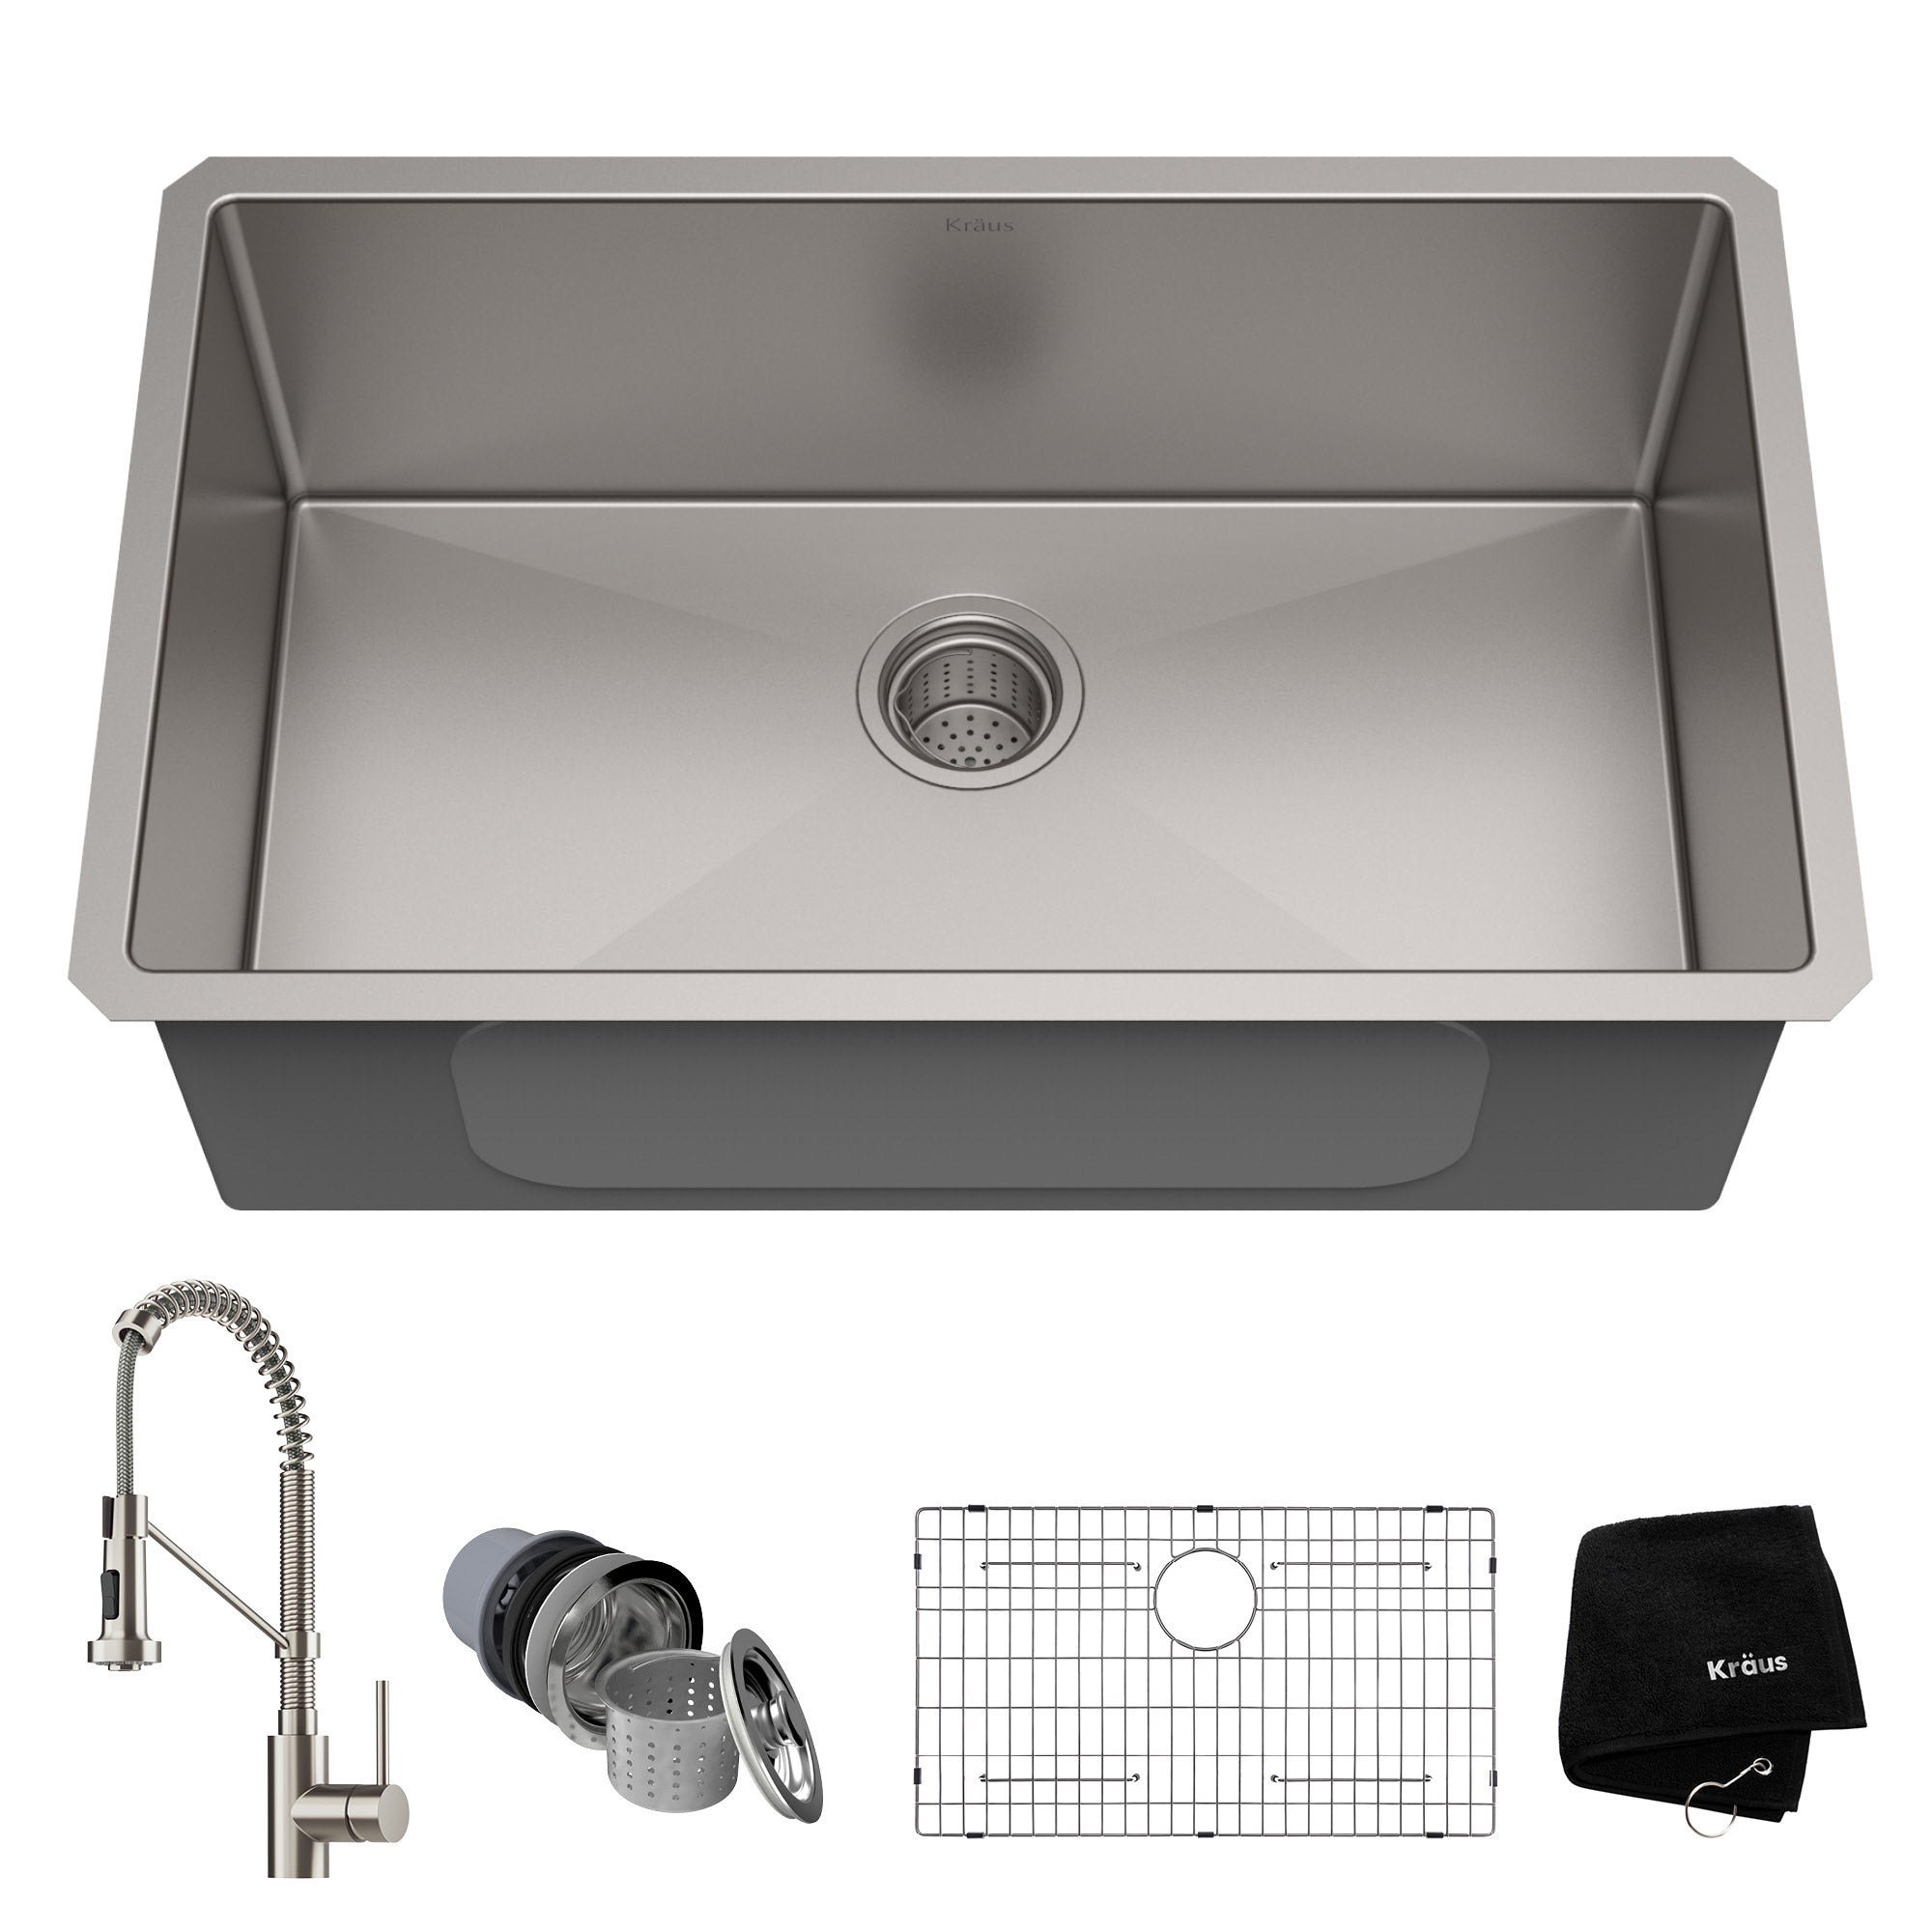 30" Undermount Single Bowl Kitchen Sink with 18" Commercial Kitchen Faucet